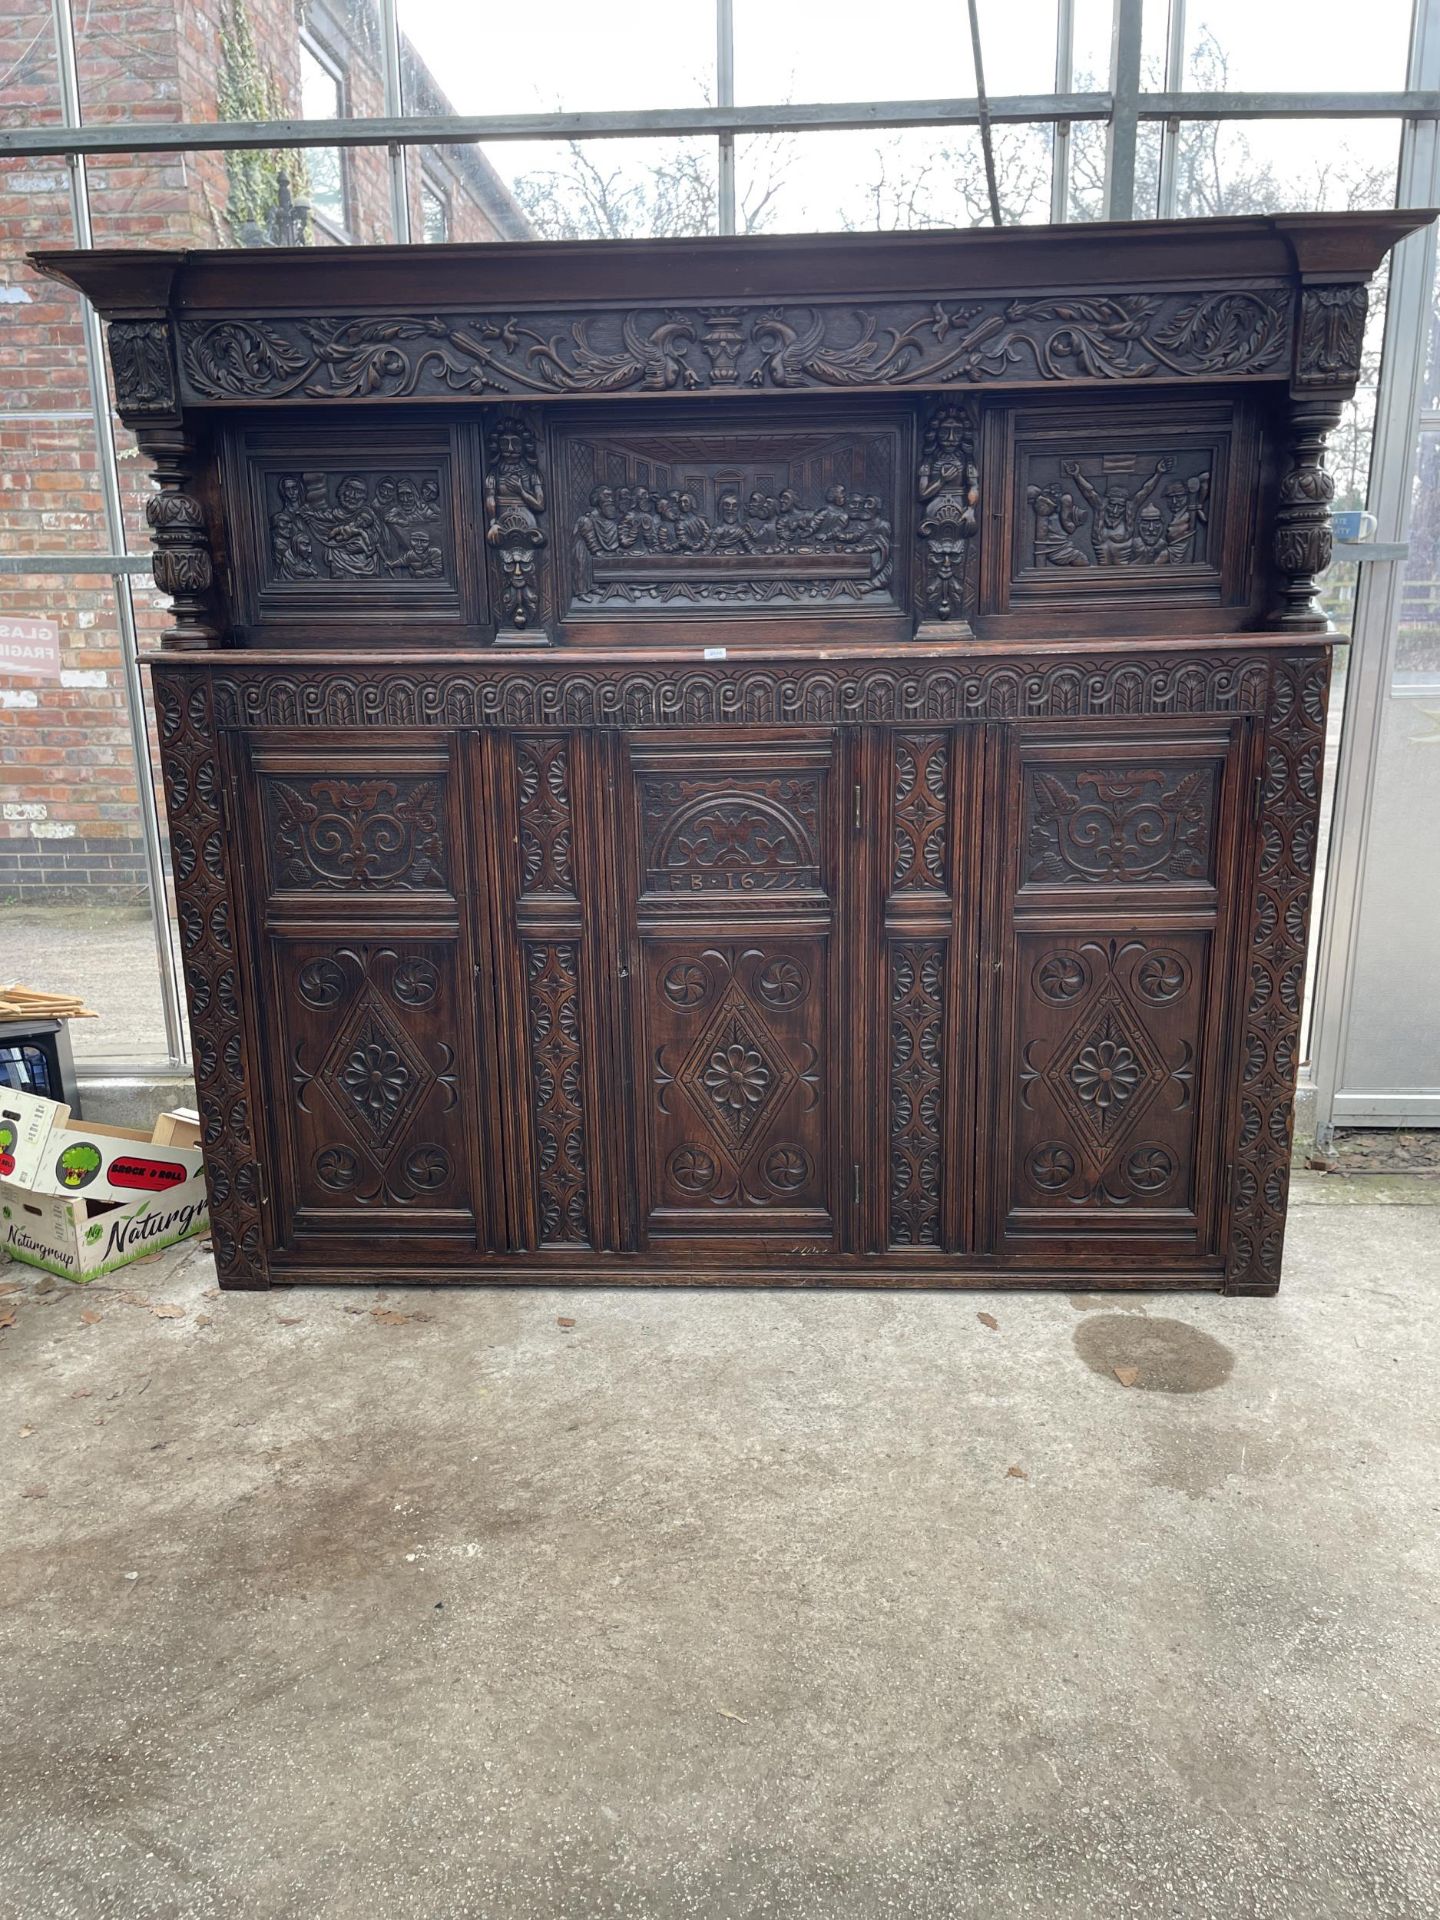 AN OAK GEORGE III STYLE COURT CUPBOARD WITH CARVED PANELS, THREE DEPICTING THE BIRTH AND CRUCIFIXION